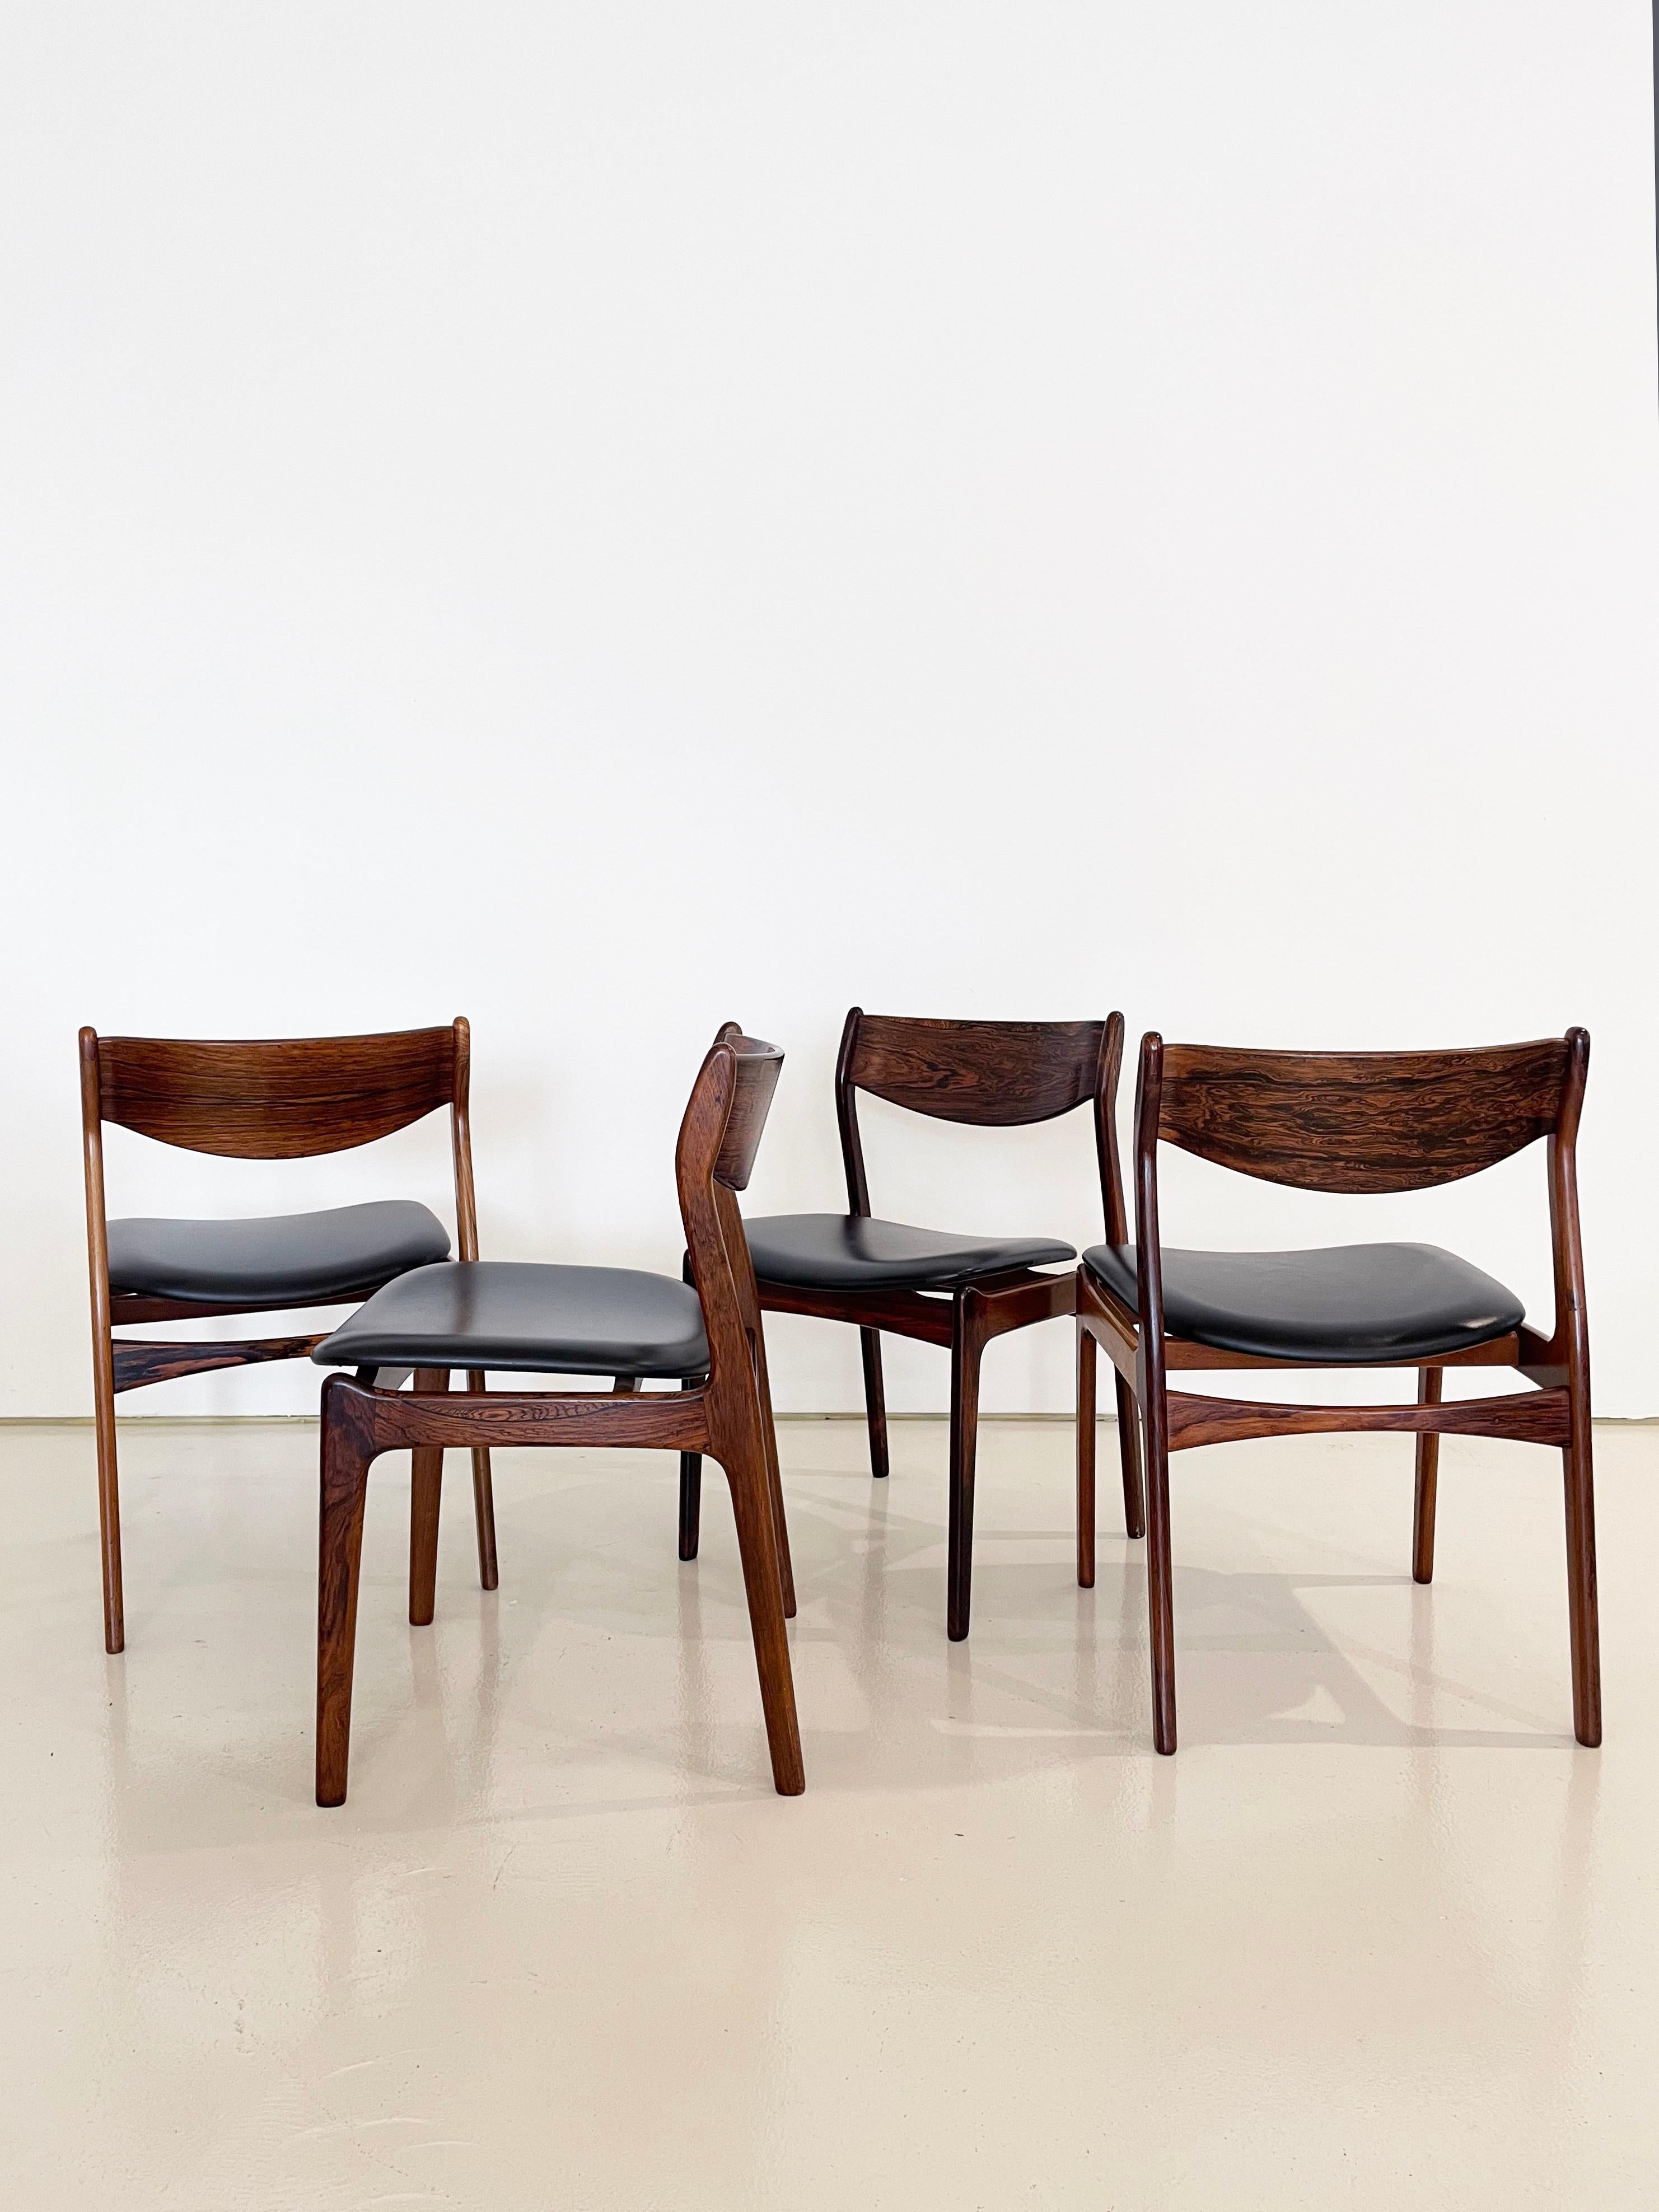 Vintage Mid-century Danish Dining Chairs, Designed by P.E. Jorgensen, Set of 8 For Sale 9